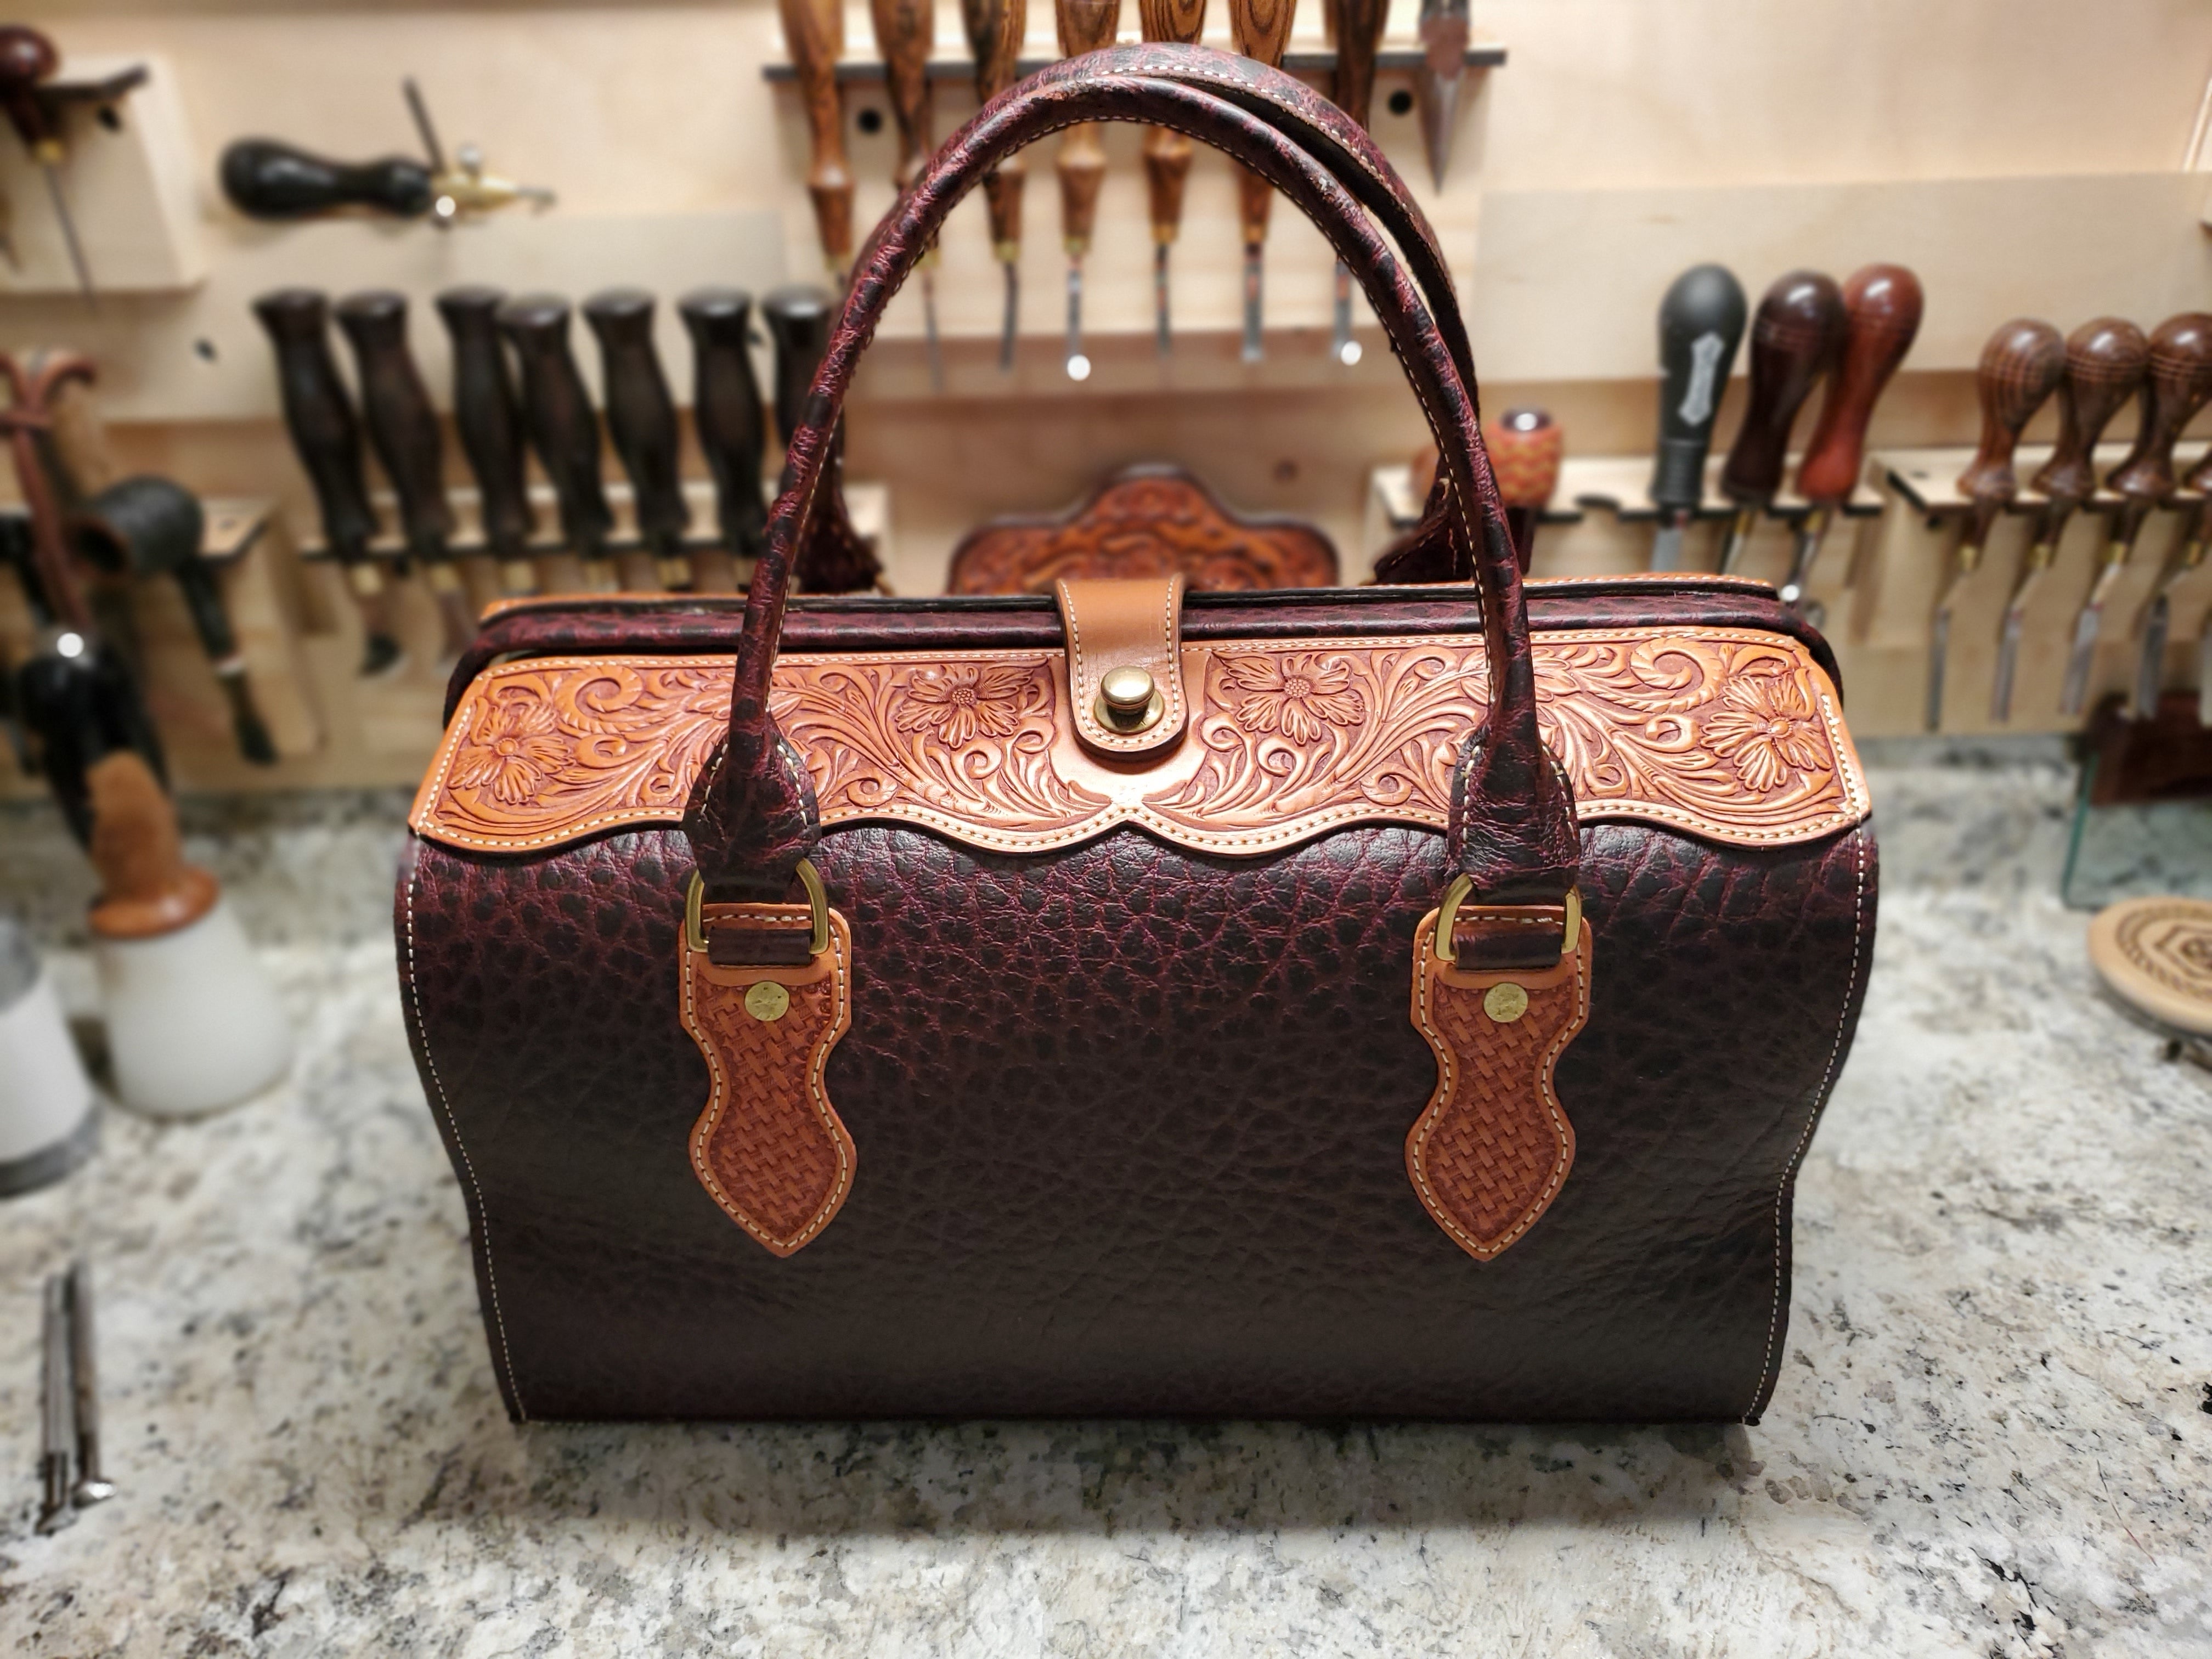 Banuce Vintage Full Grains Italian Leather Briefcase for Women Business Handbag  Doctor Bag Purse Brown : Amazon.ca: Clothing, Shoes & Accessories